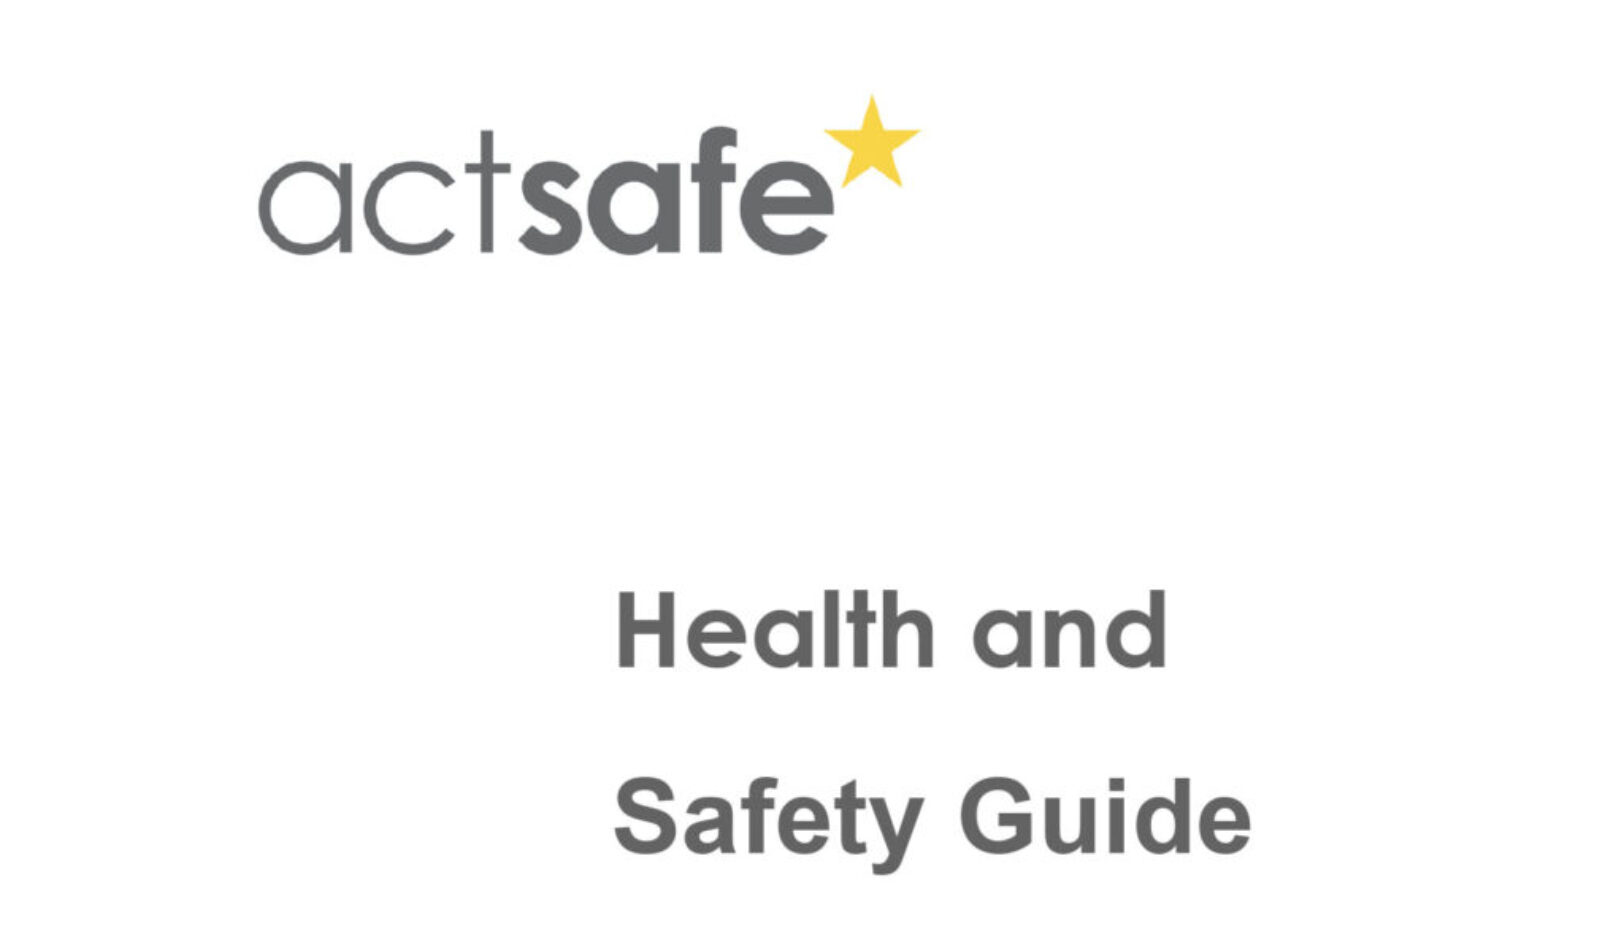 Health and Safety Guide for Live Performance (Festivals)